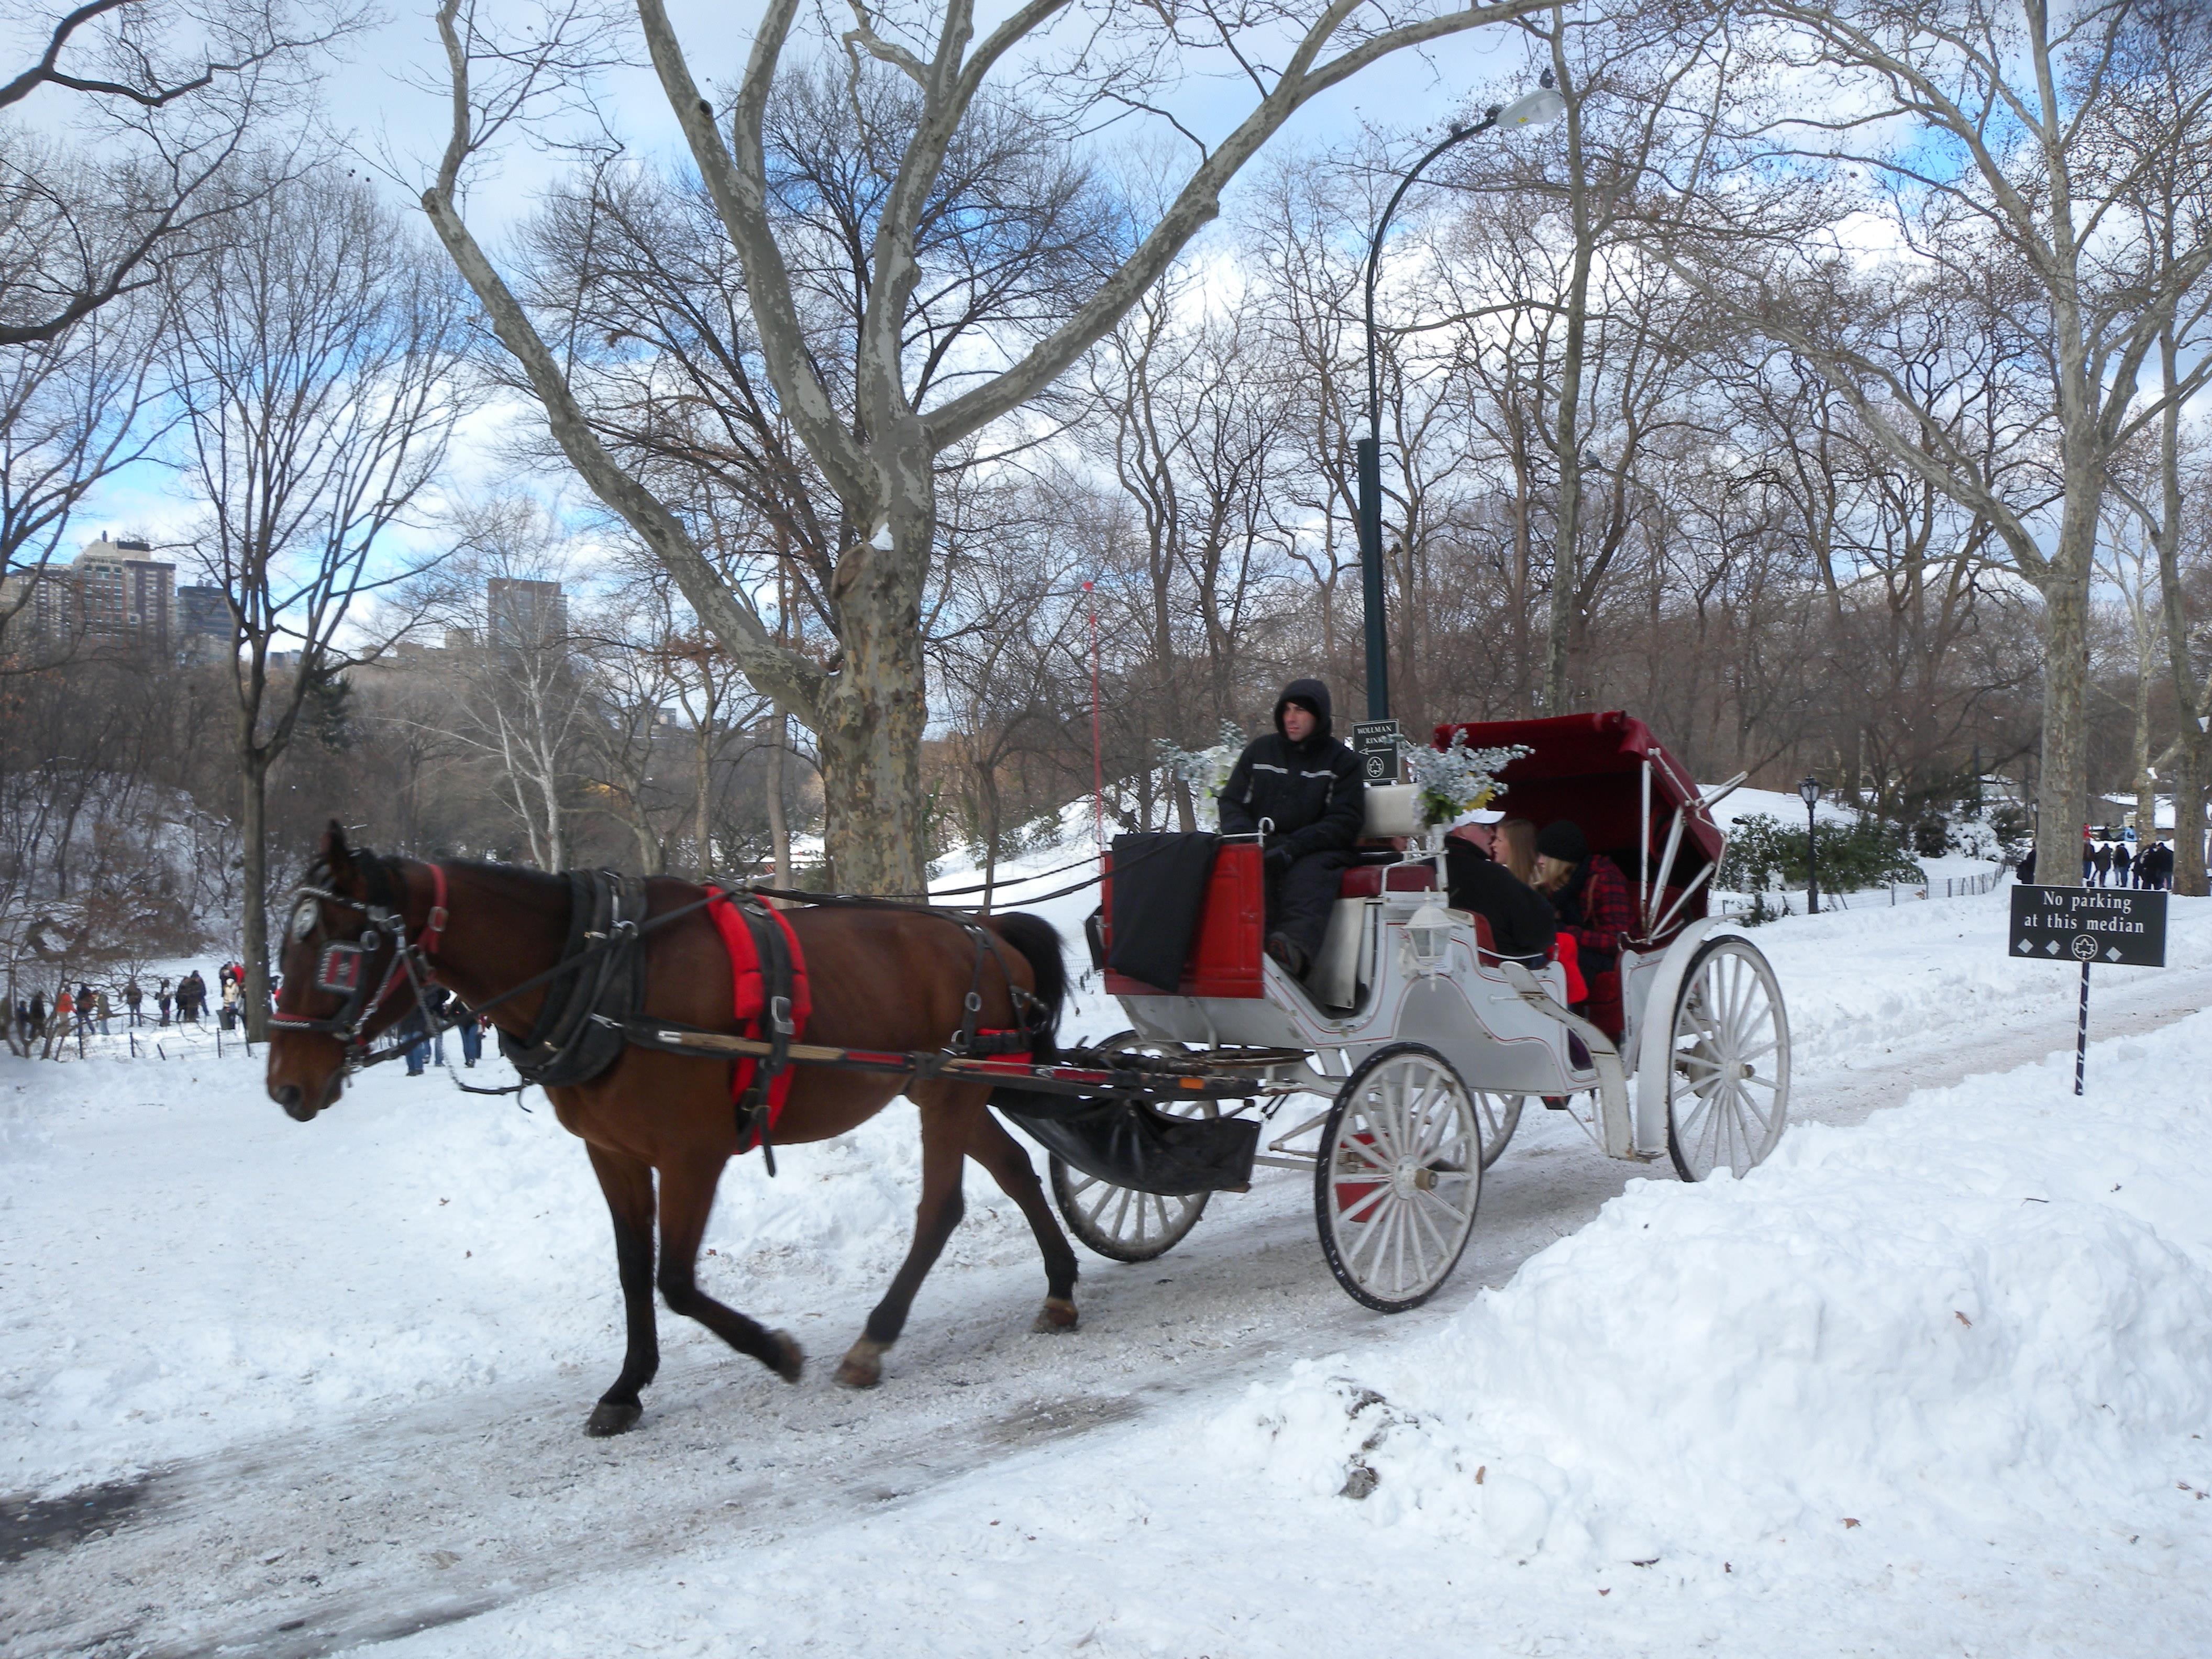 File:Snowy carriage ride CP jeh.jpg - Wikimedia Commons